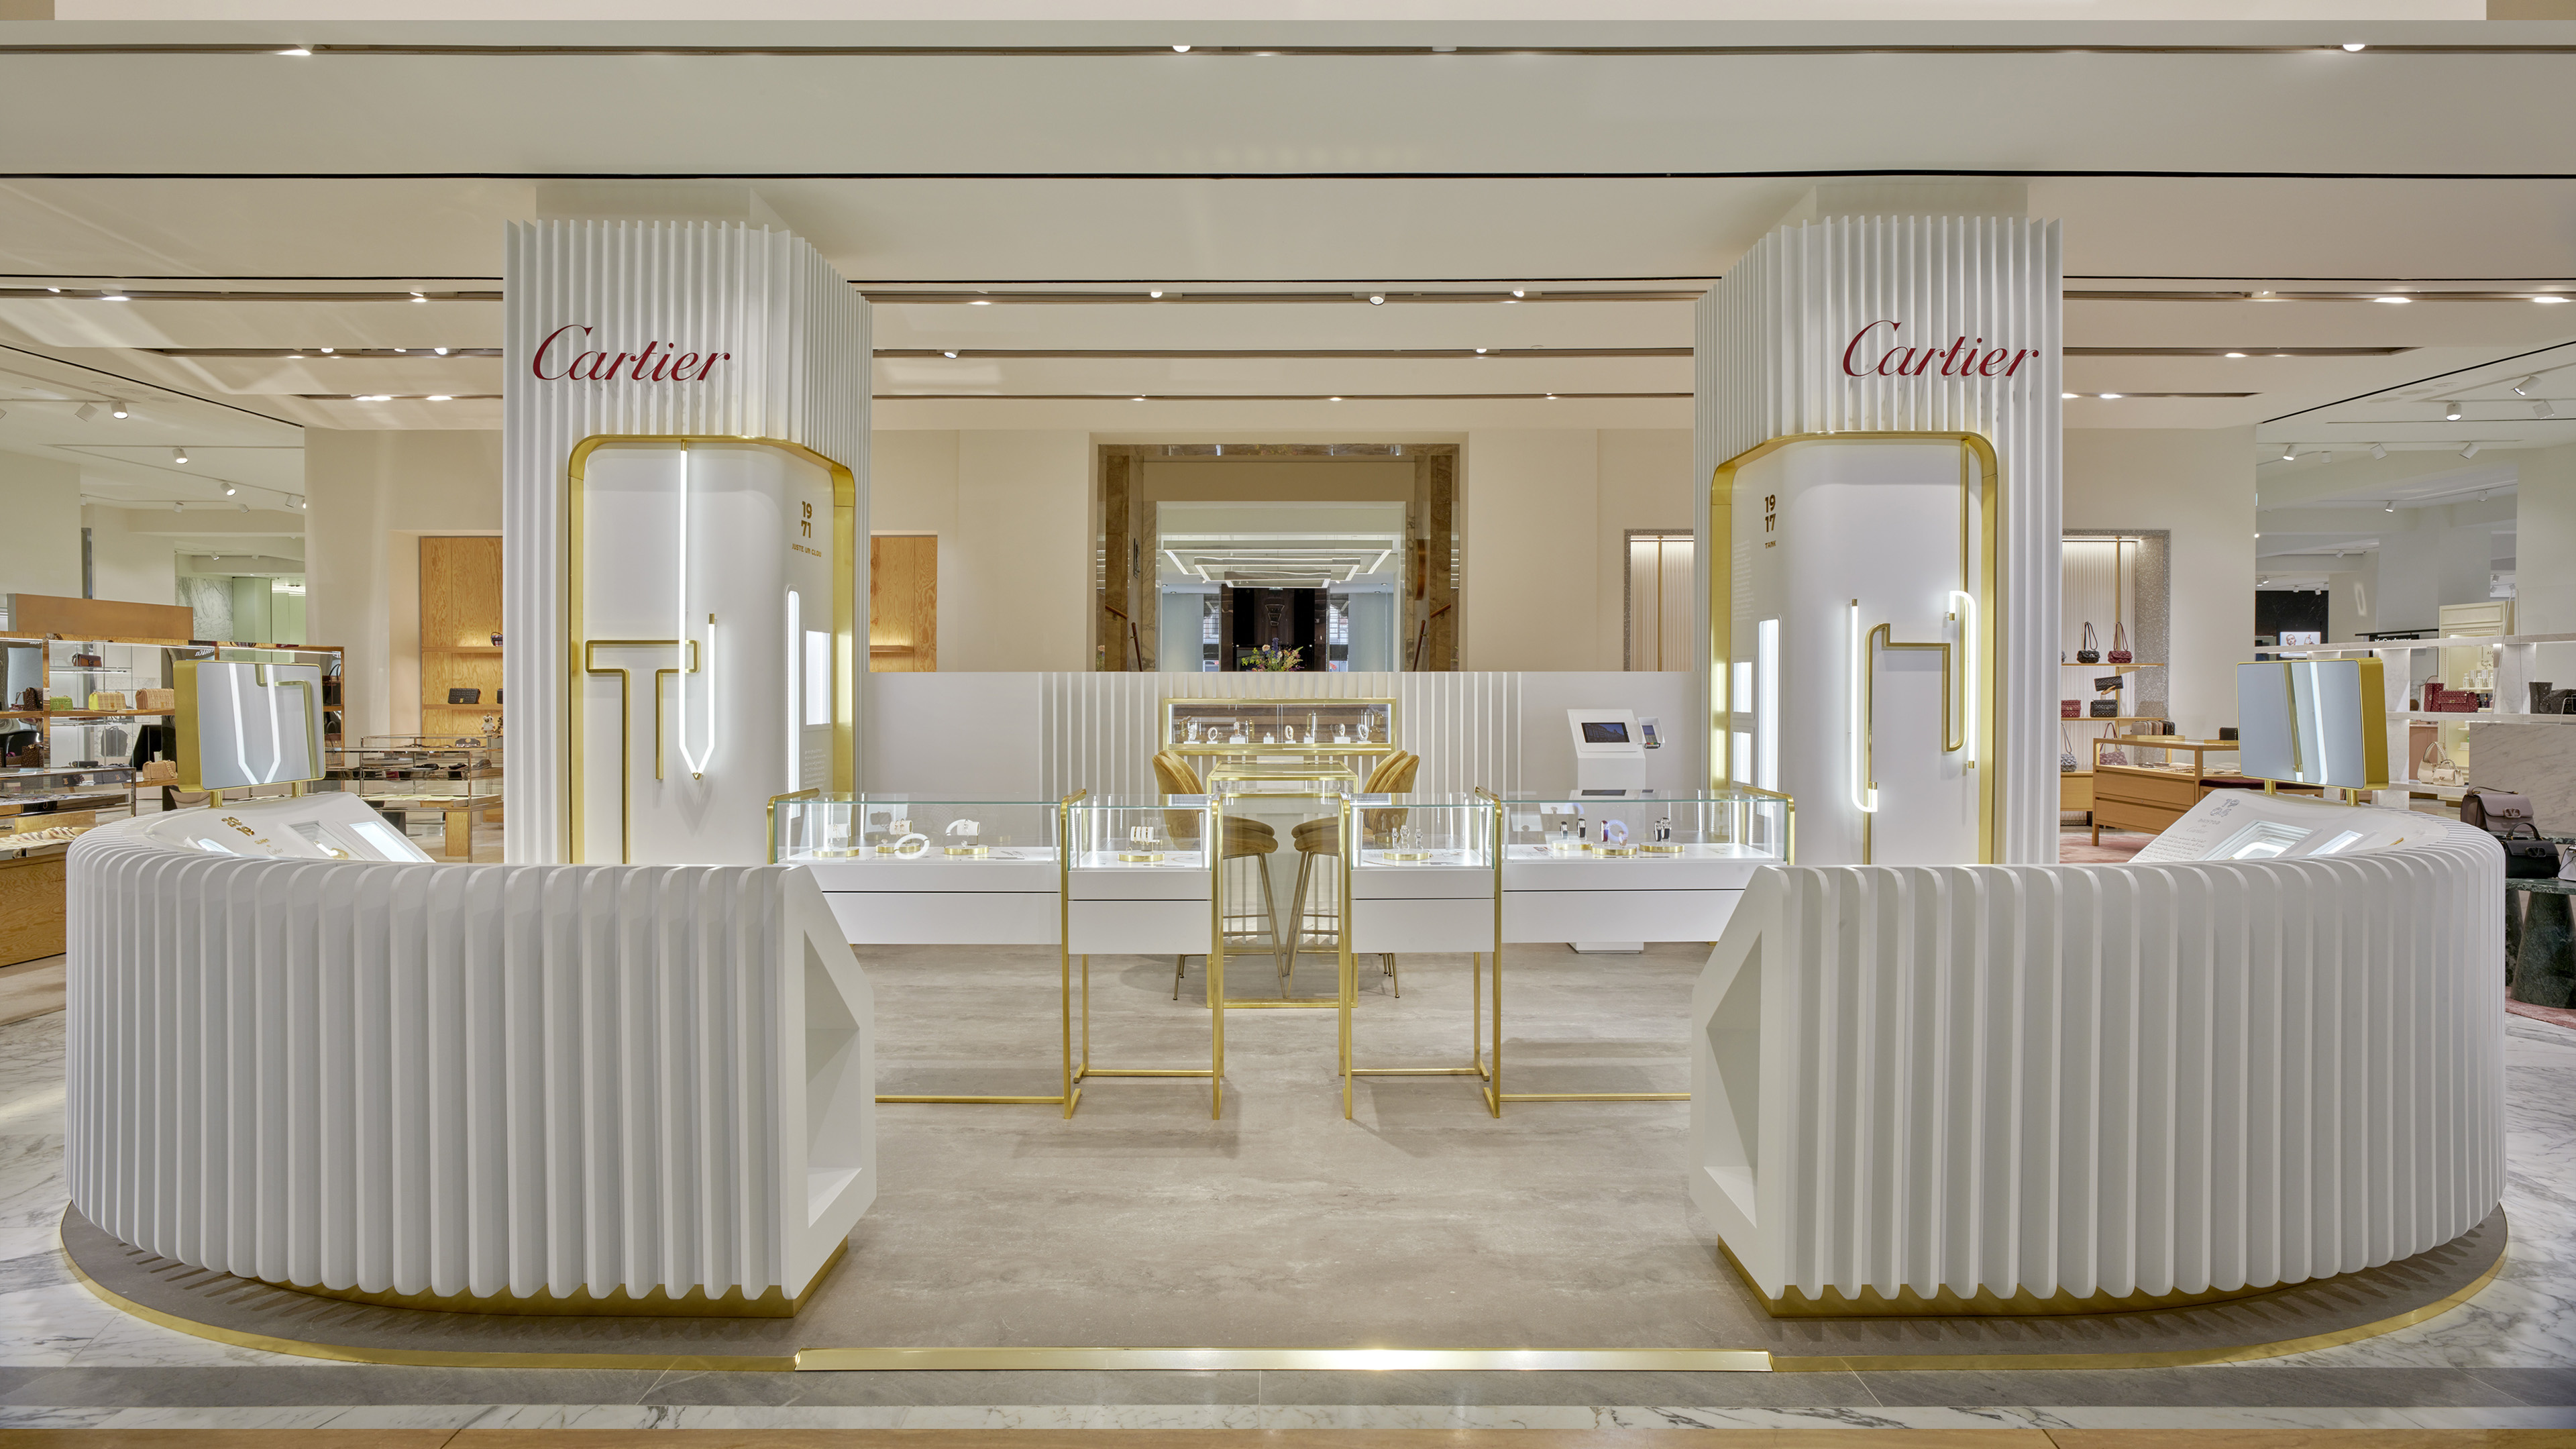 Cartier: A wholly owned subsidiary of the Swiss Richemont Group, Jewelry manufacturer. 3840x2160 4K Wallpaper.